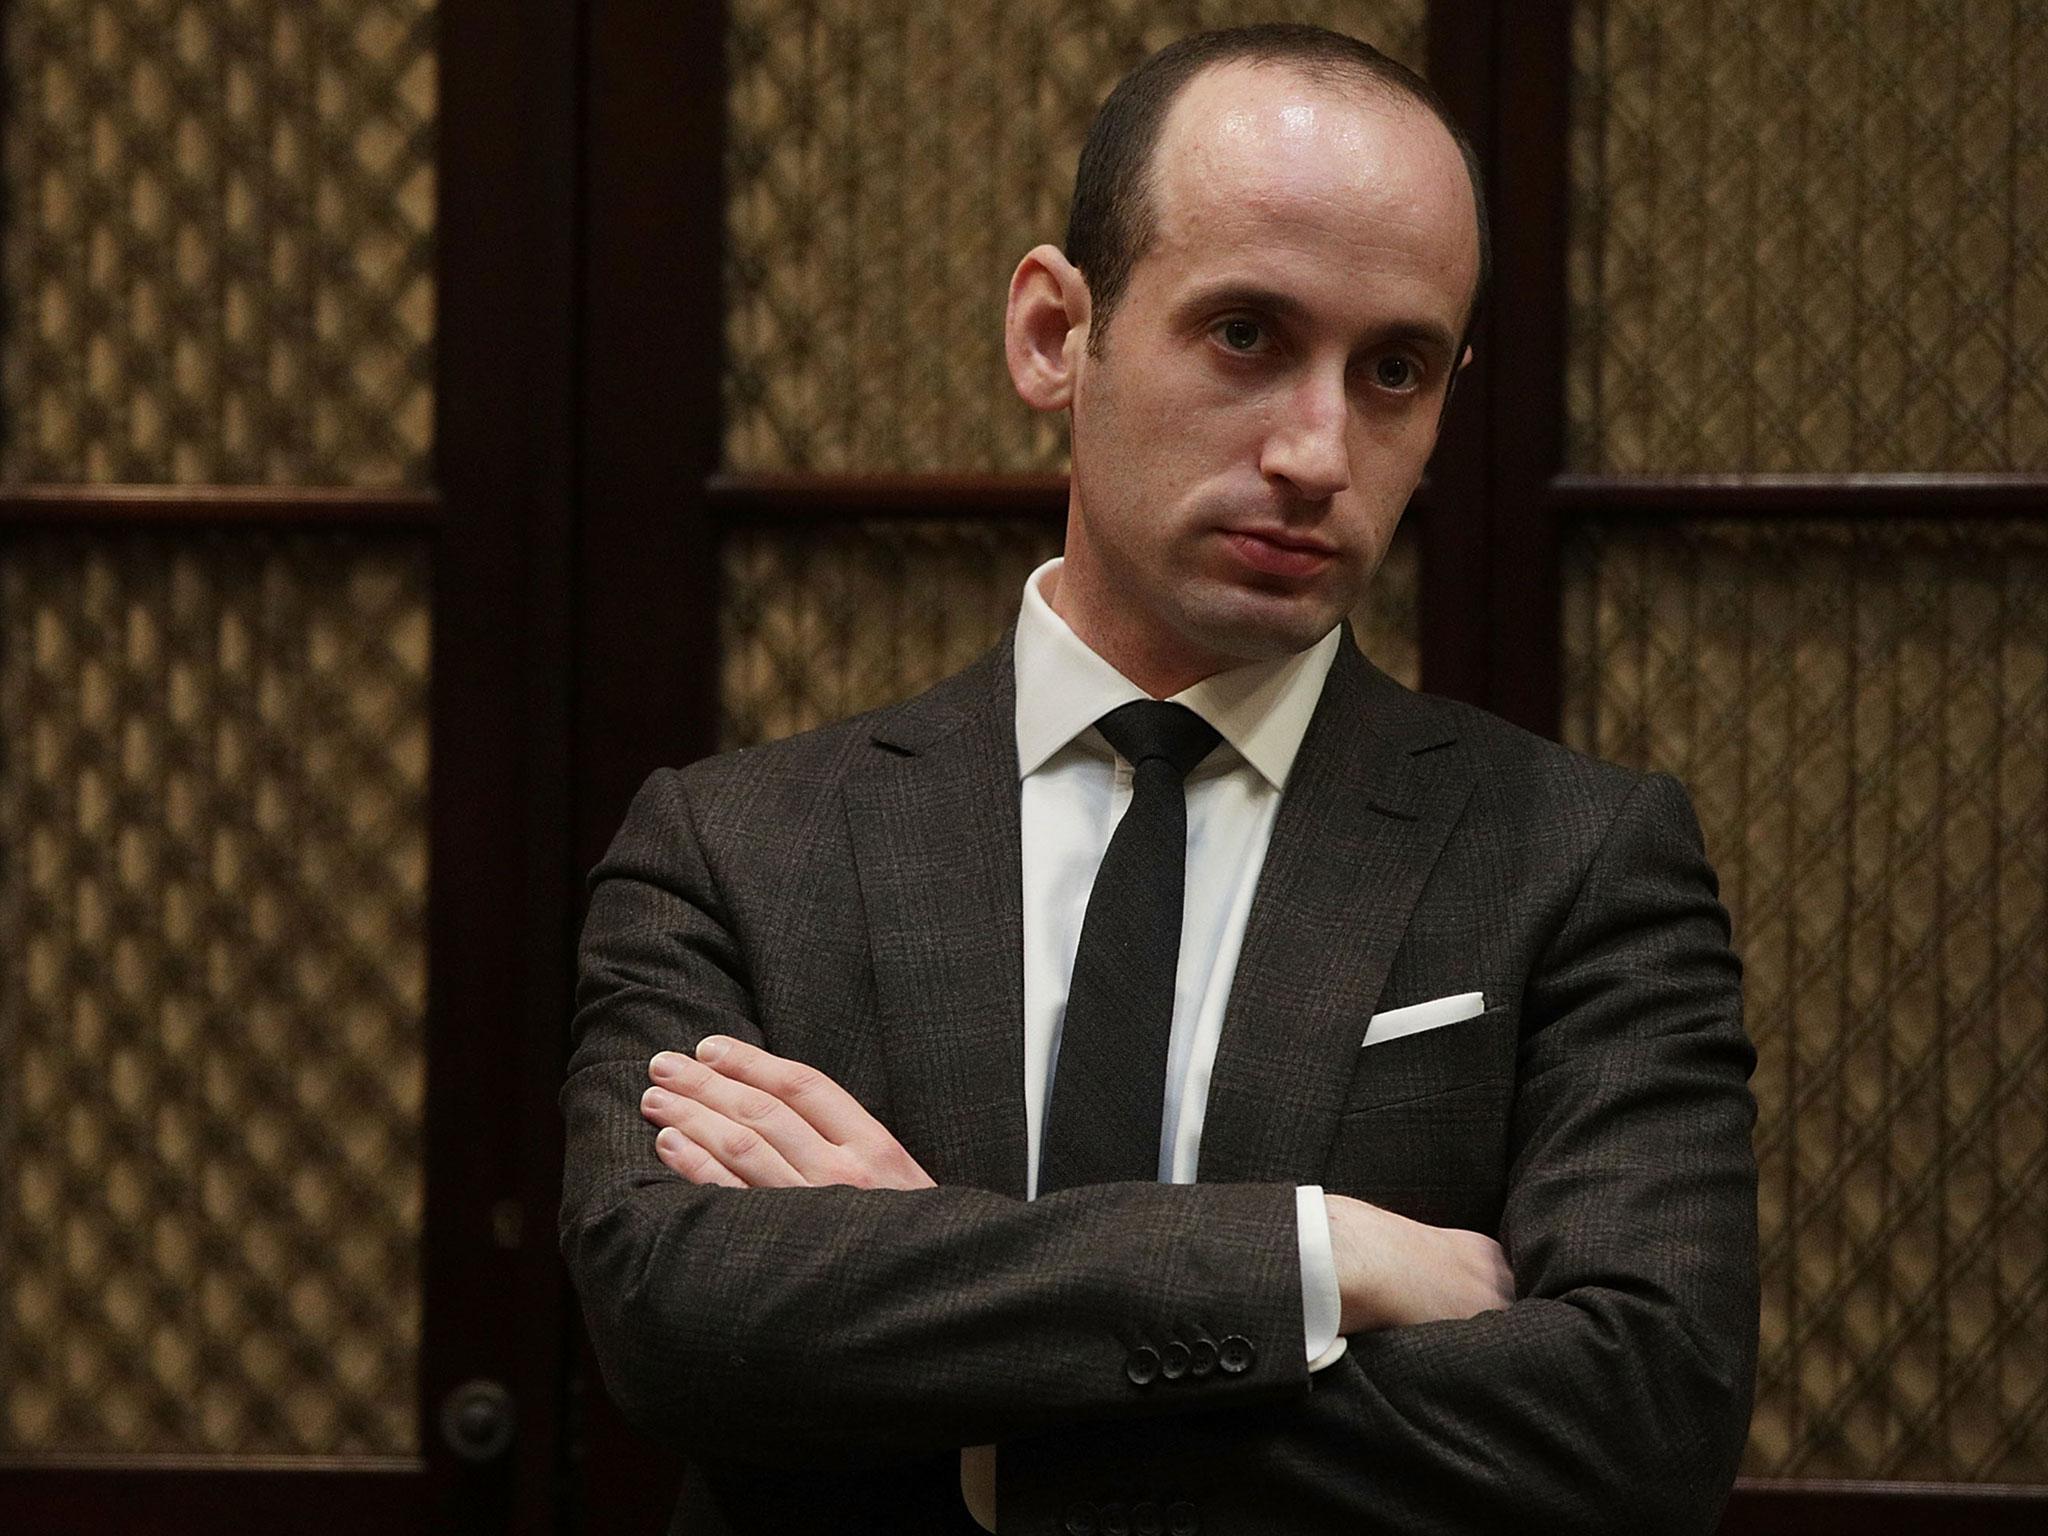 Mr Miller played a key role in drafting the Trump administration's ban on people from seven Muslim-majority countries - which was denounced as a ban on Muslims